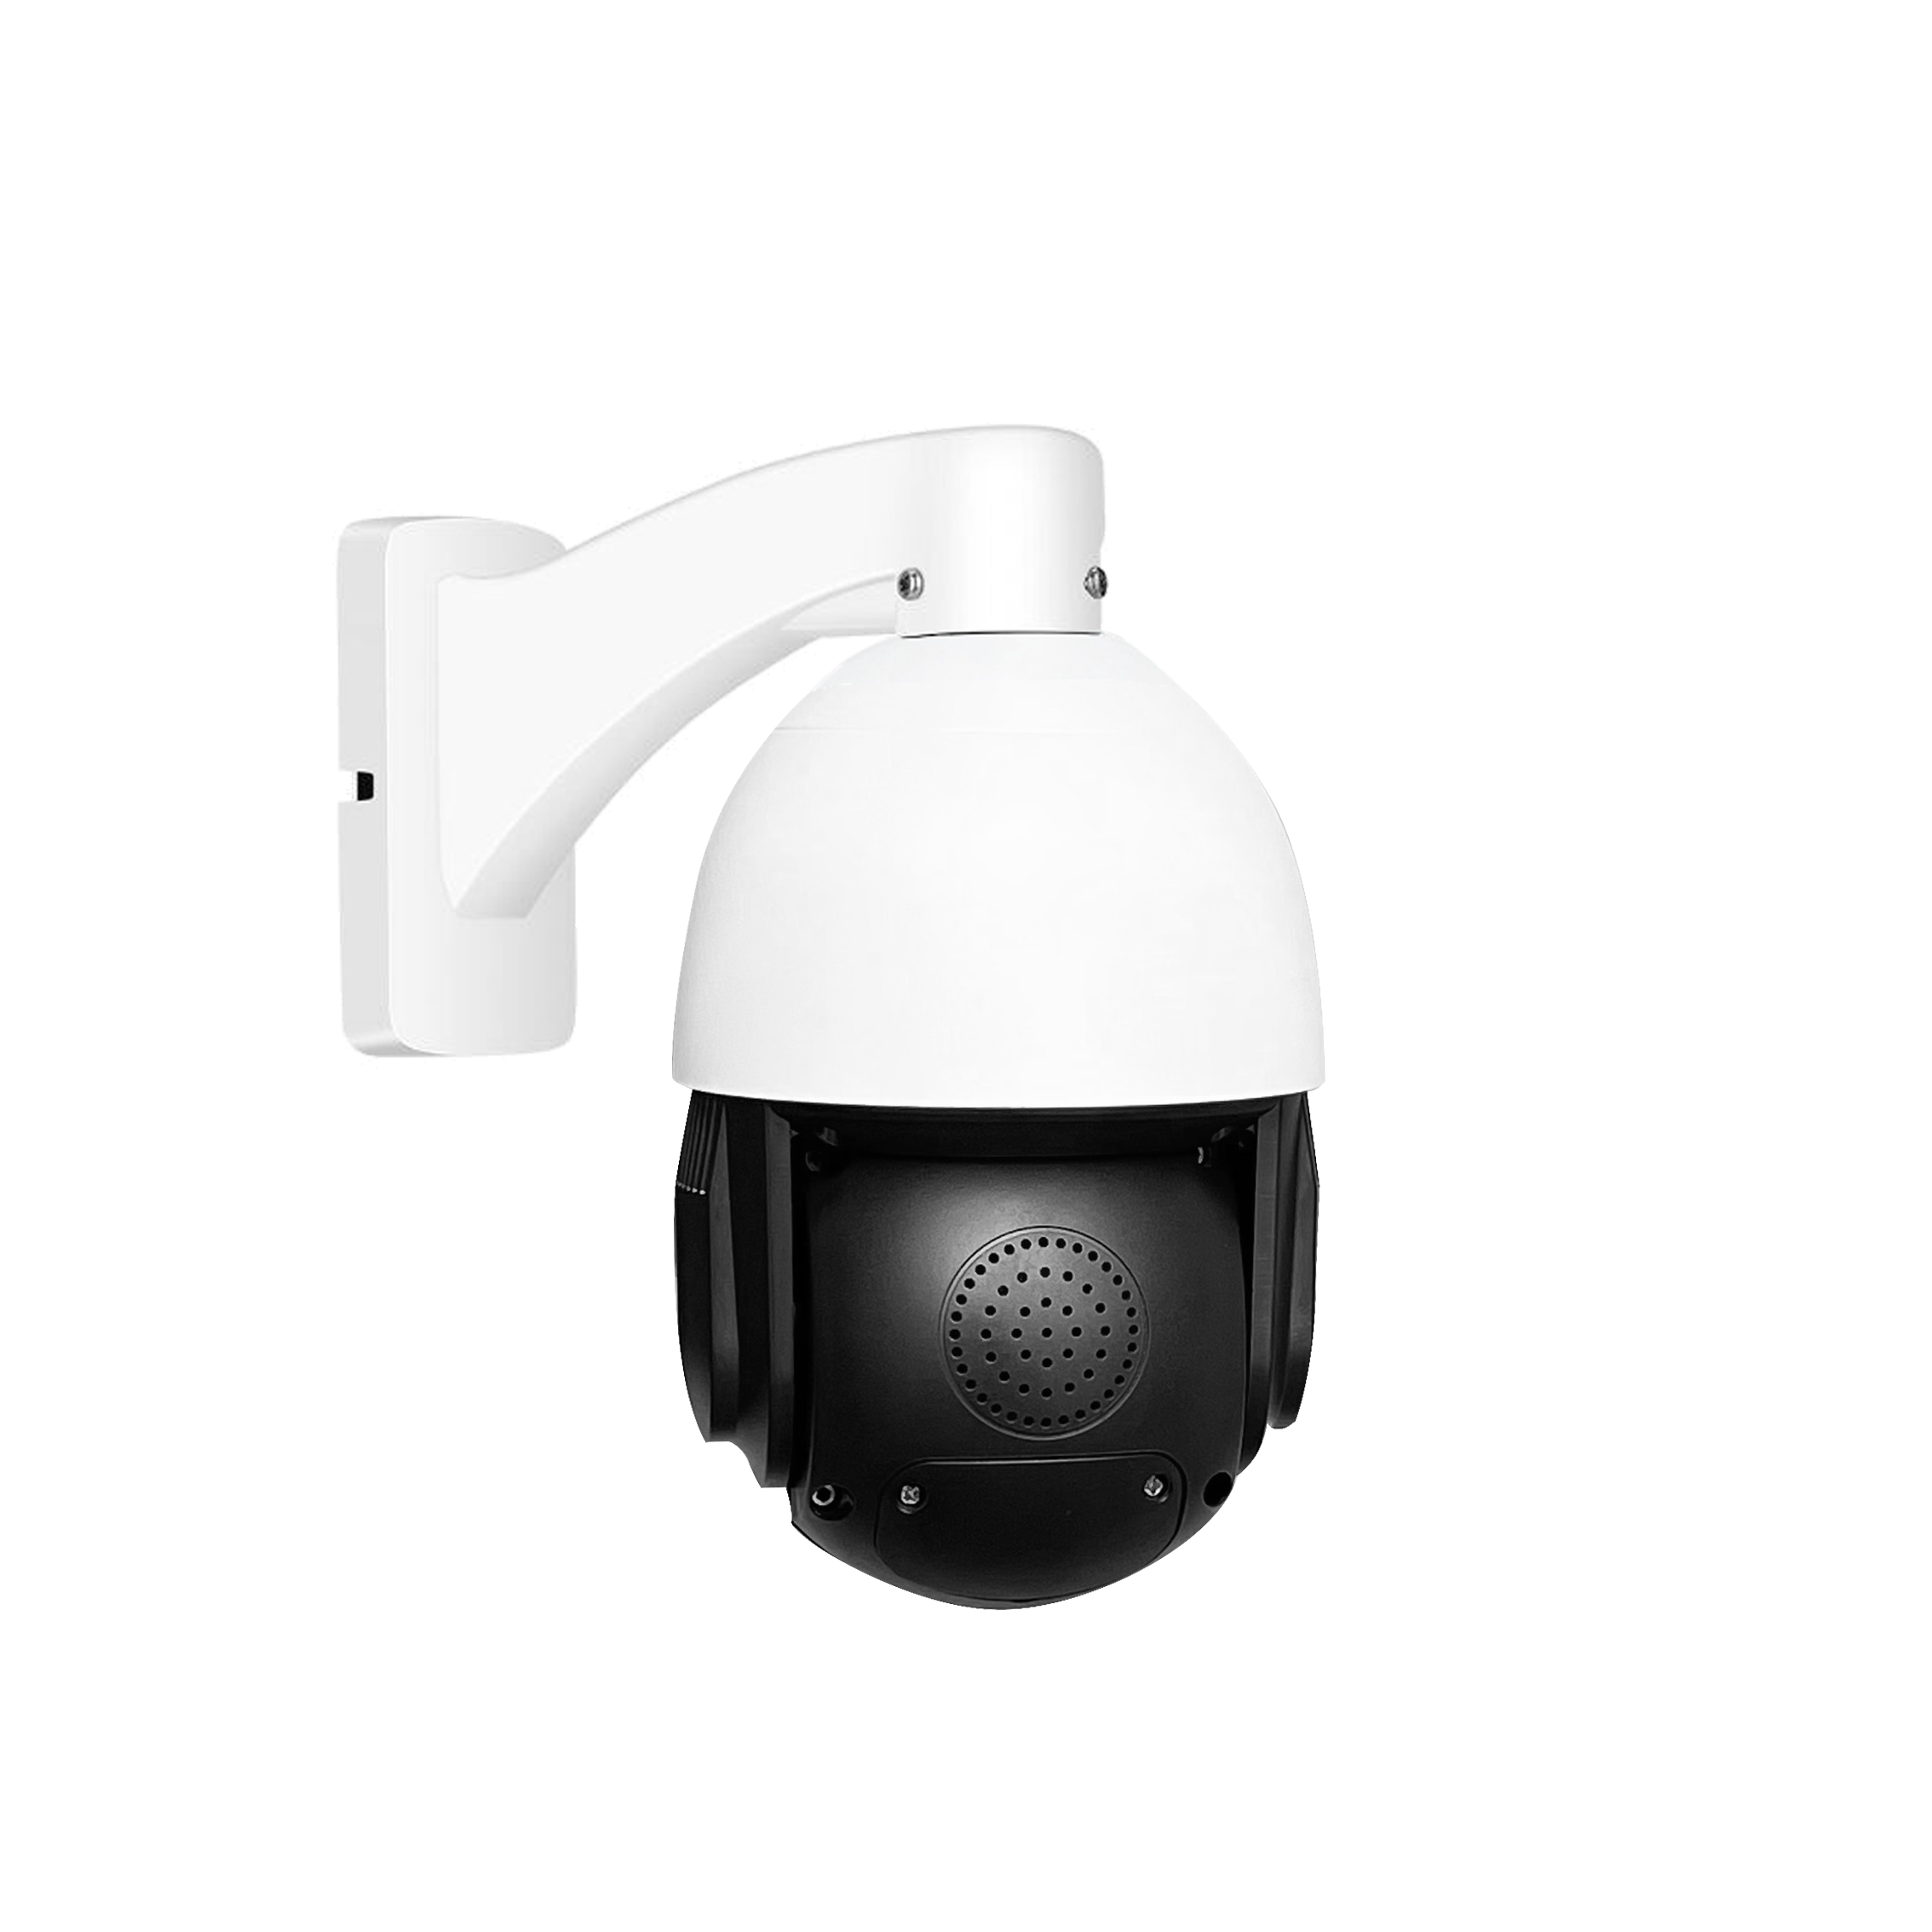 Microseven Open Source 4K/8MP Full Color Night Vision UltraHD PoE+ 20X Optical Zoom Pan Tilt Speed Dome IP Camera, Human & Vehicle Motion Detection & Auto Tracking, Indoor / Outdoor PTZ Camera,WDR, DNR, Day & Night,Sony Starvis CMOS,IP66 Weatherproof, Built-in 256GB SDcard Slot, Two-Way Audio, Auto Cruise,ONVIF, Web GUI & Apps, VMS (Video Management System), Free 24Hr Cloud Storage + Broadcasting on YouTube,Facebook & Microseven.tv